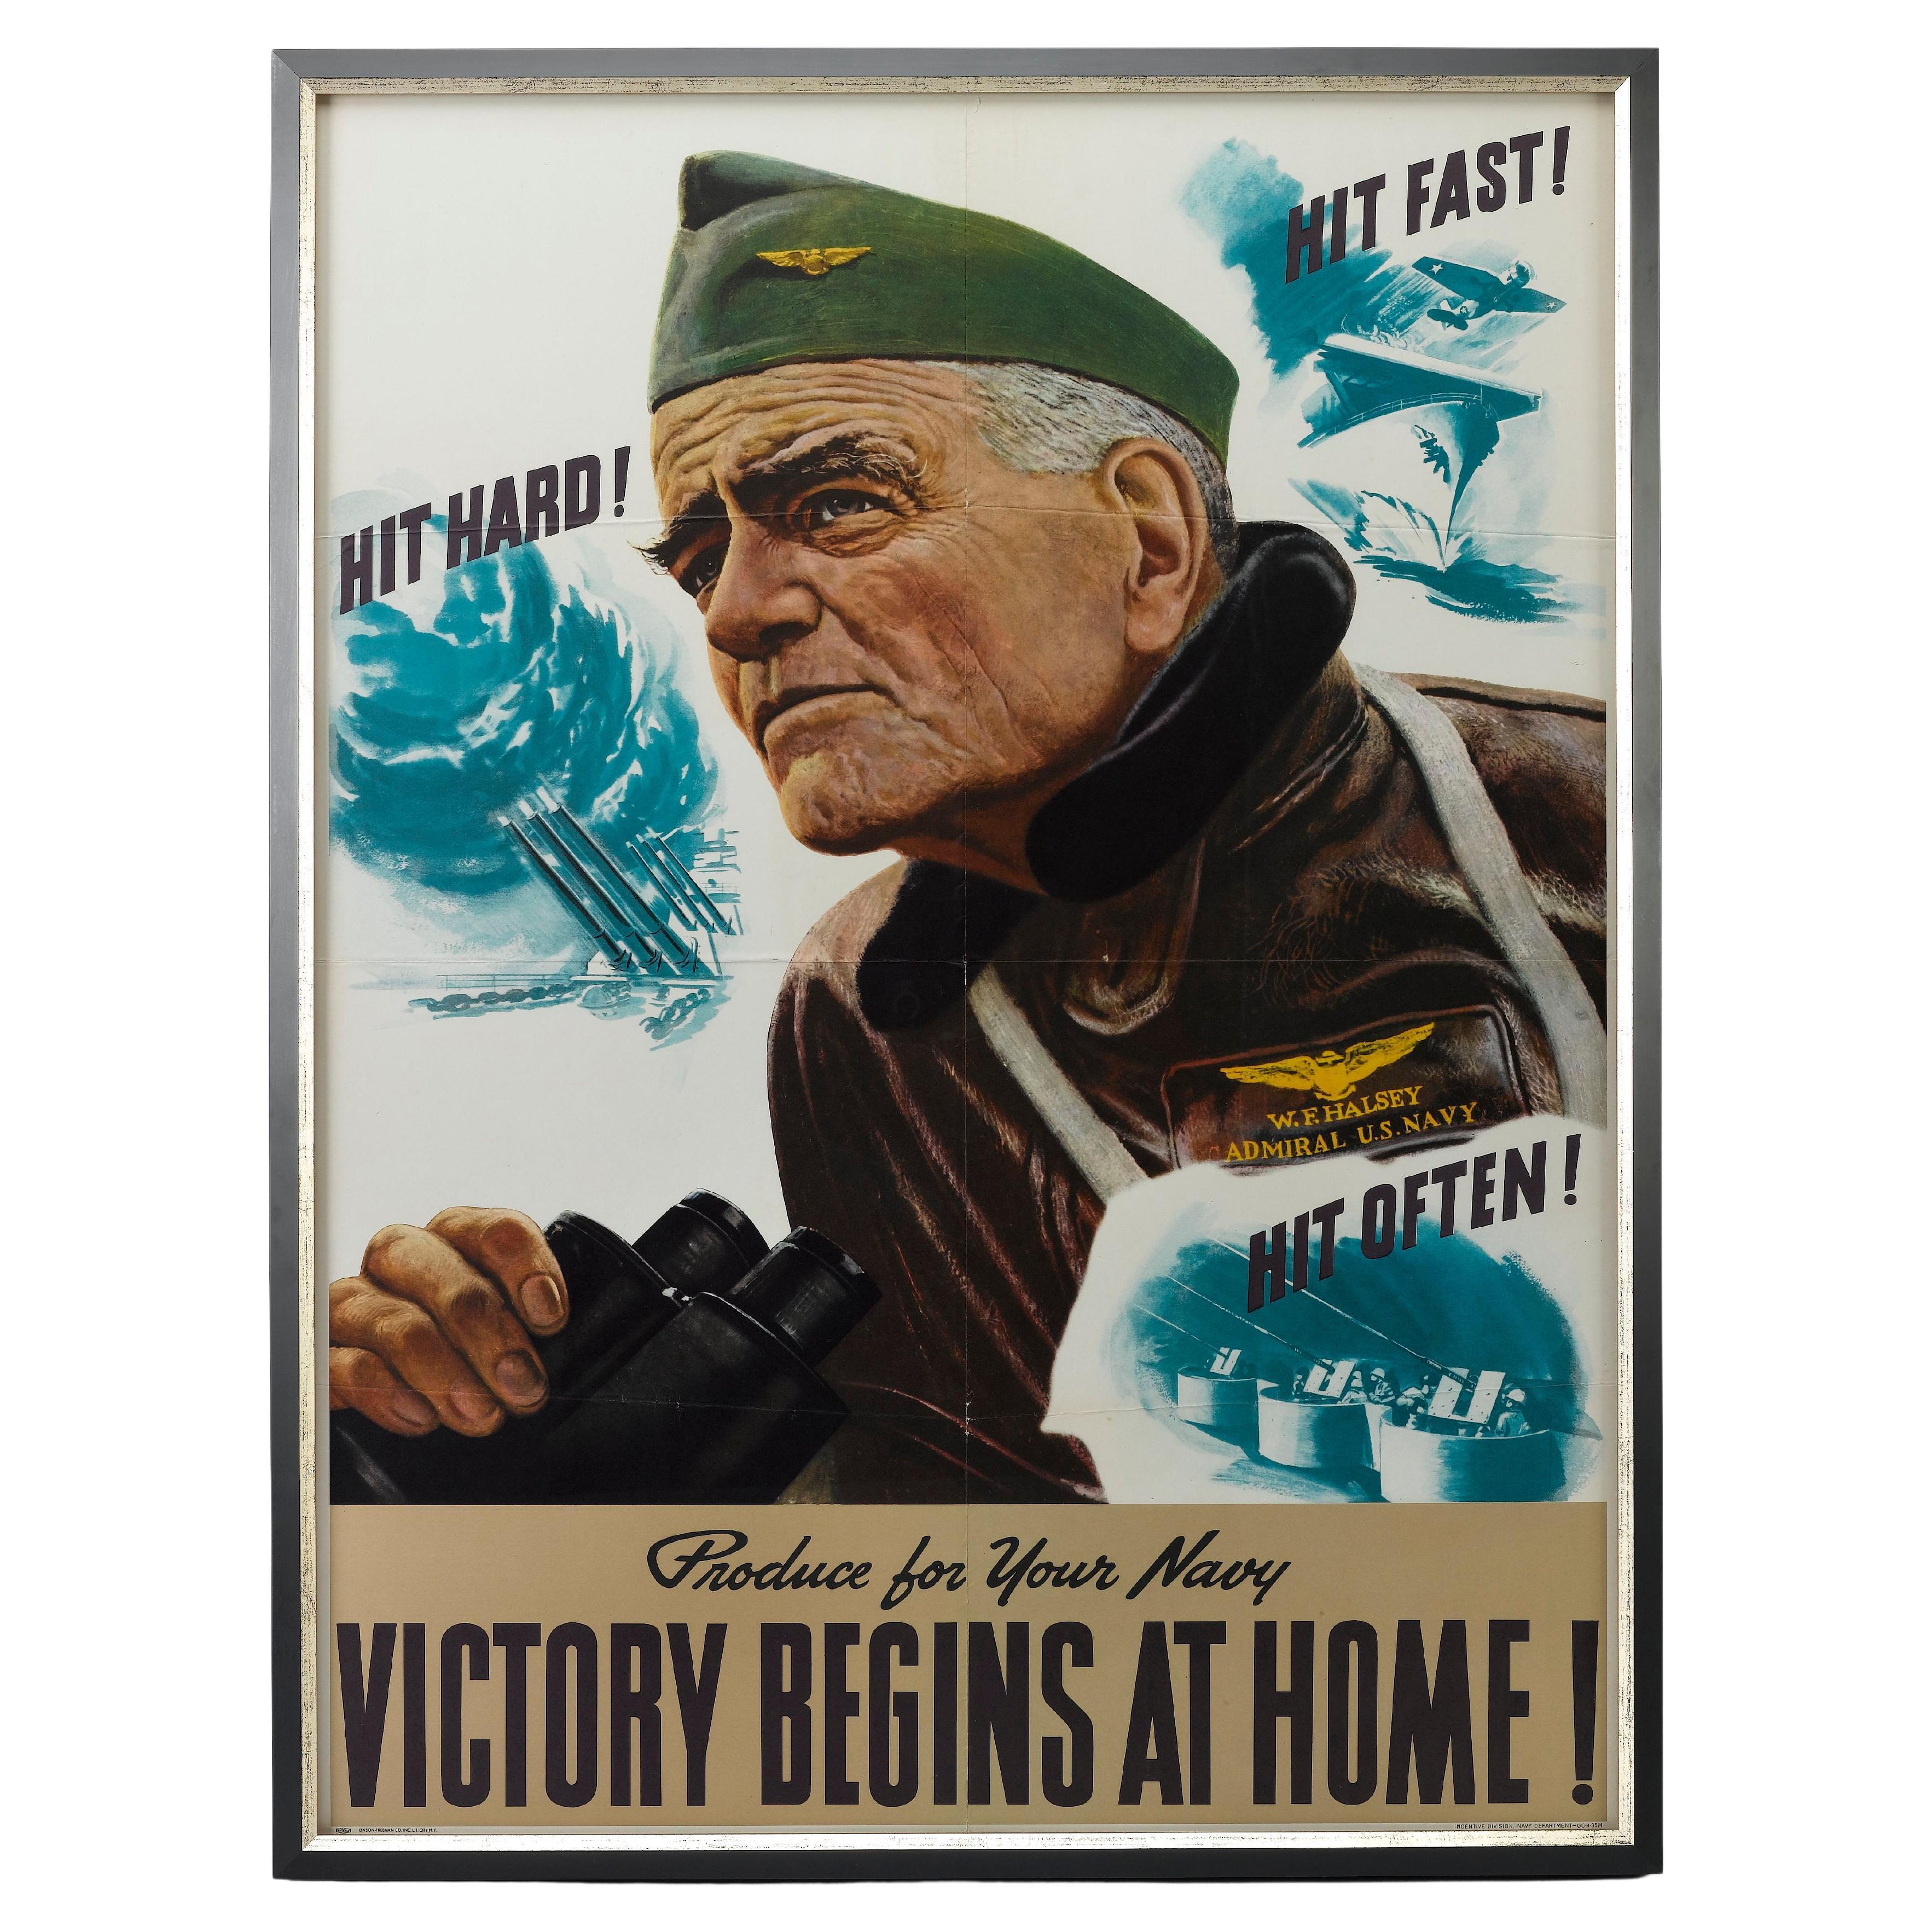 "Produce for your Navy / Victory Begins at Home!" Vintage WWII Poster